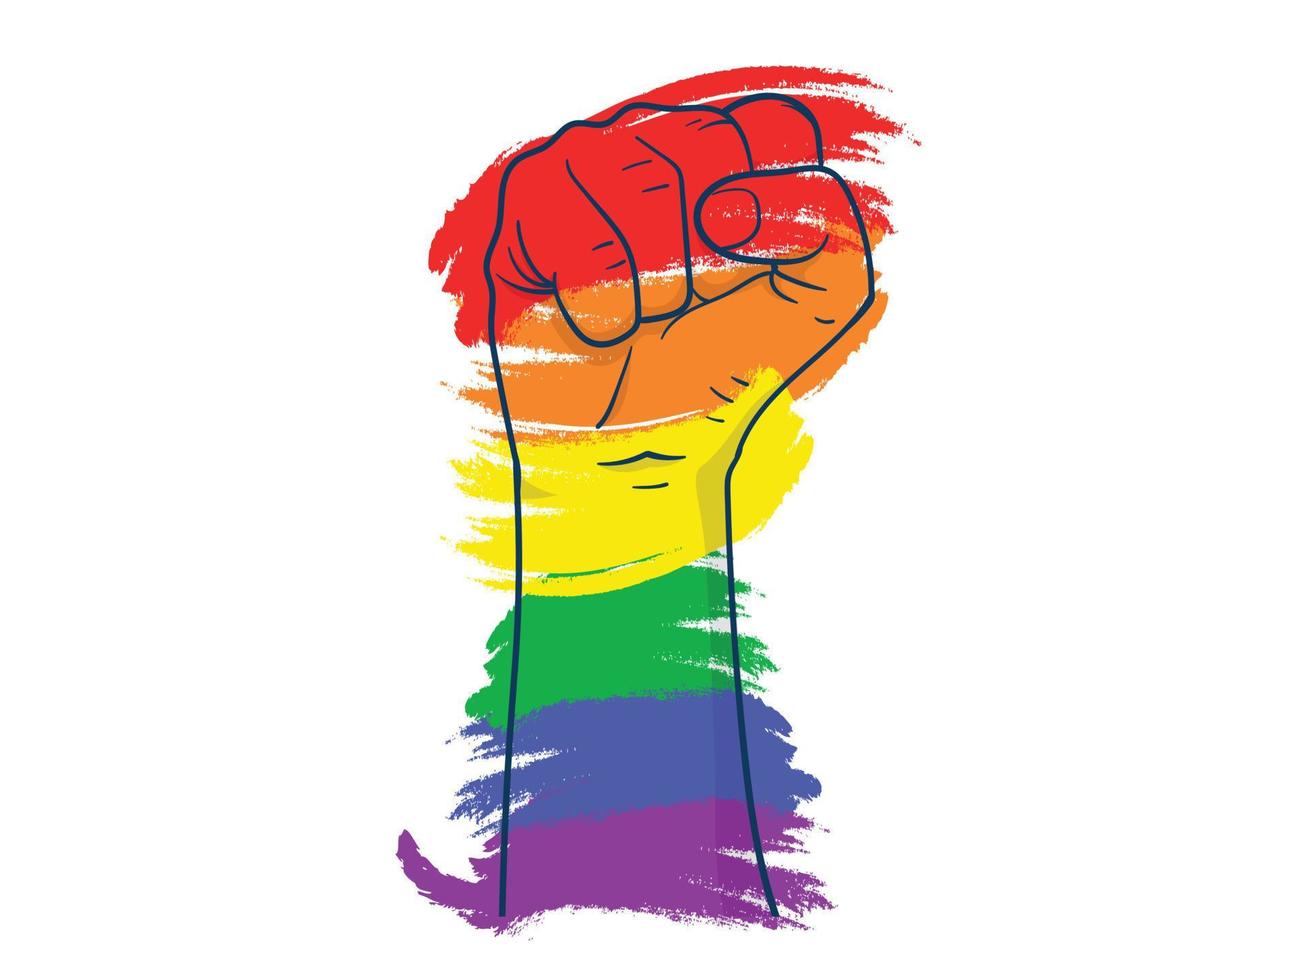 Fight for gay LGBT rights rainbow fist white background vector